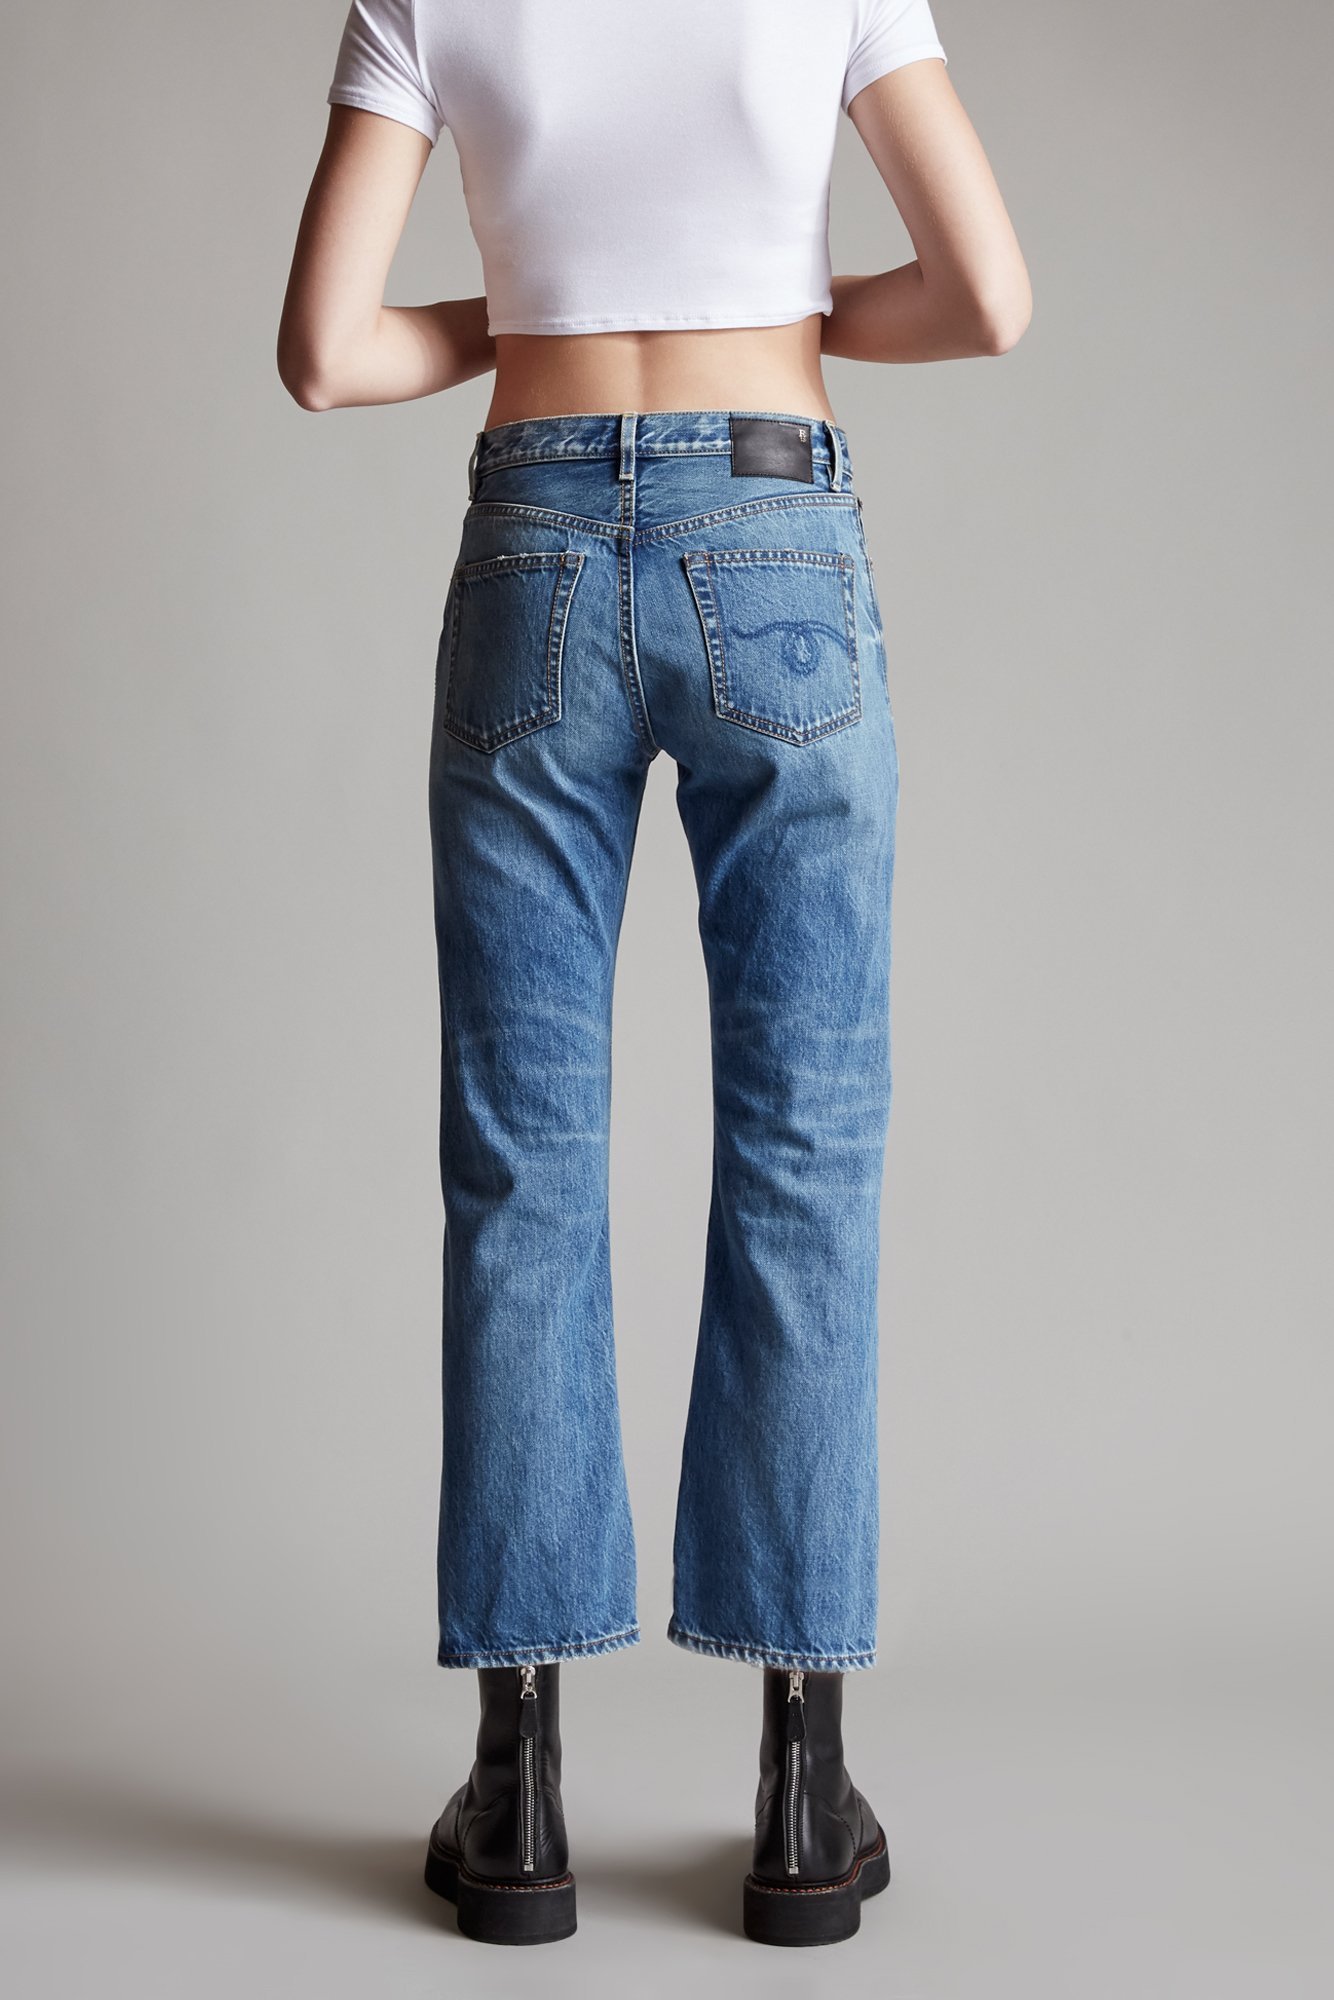 R13 Jeans, 26 - Huntessa Luxury Online Consignment Boutique